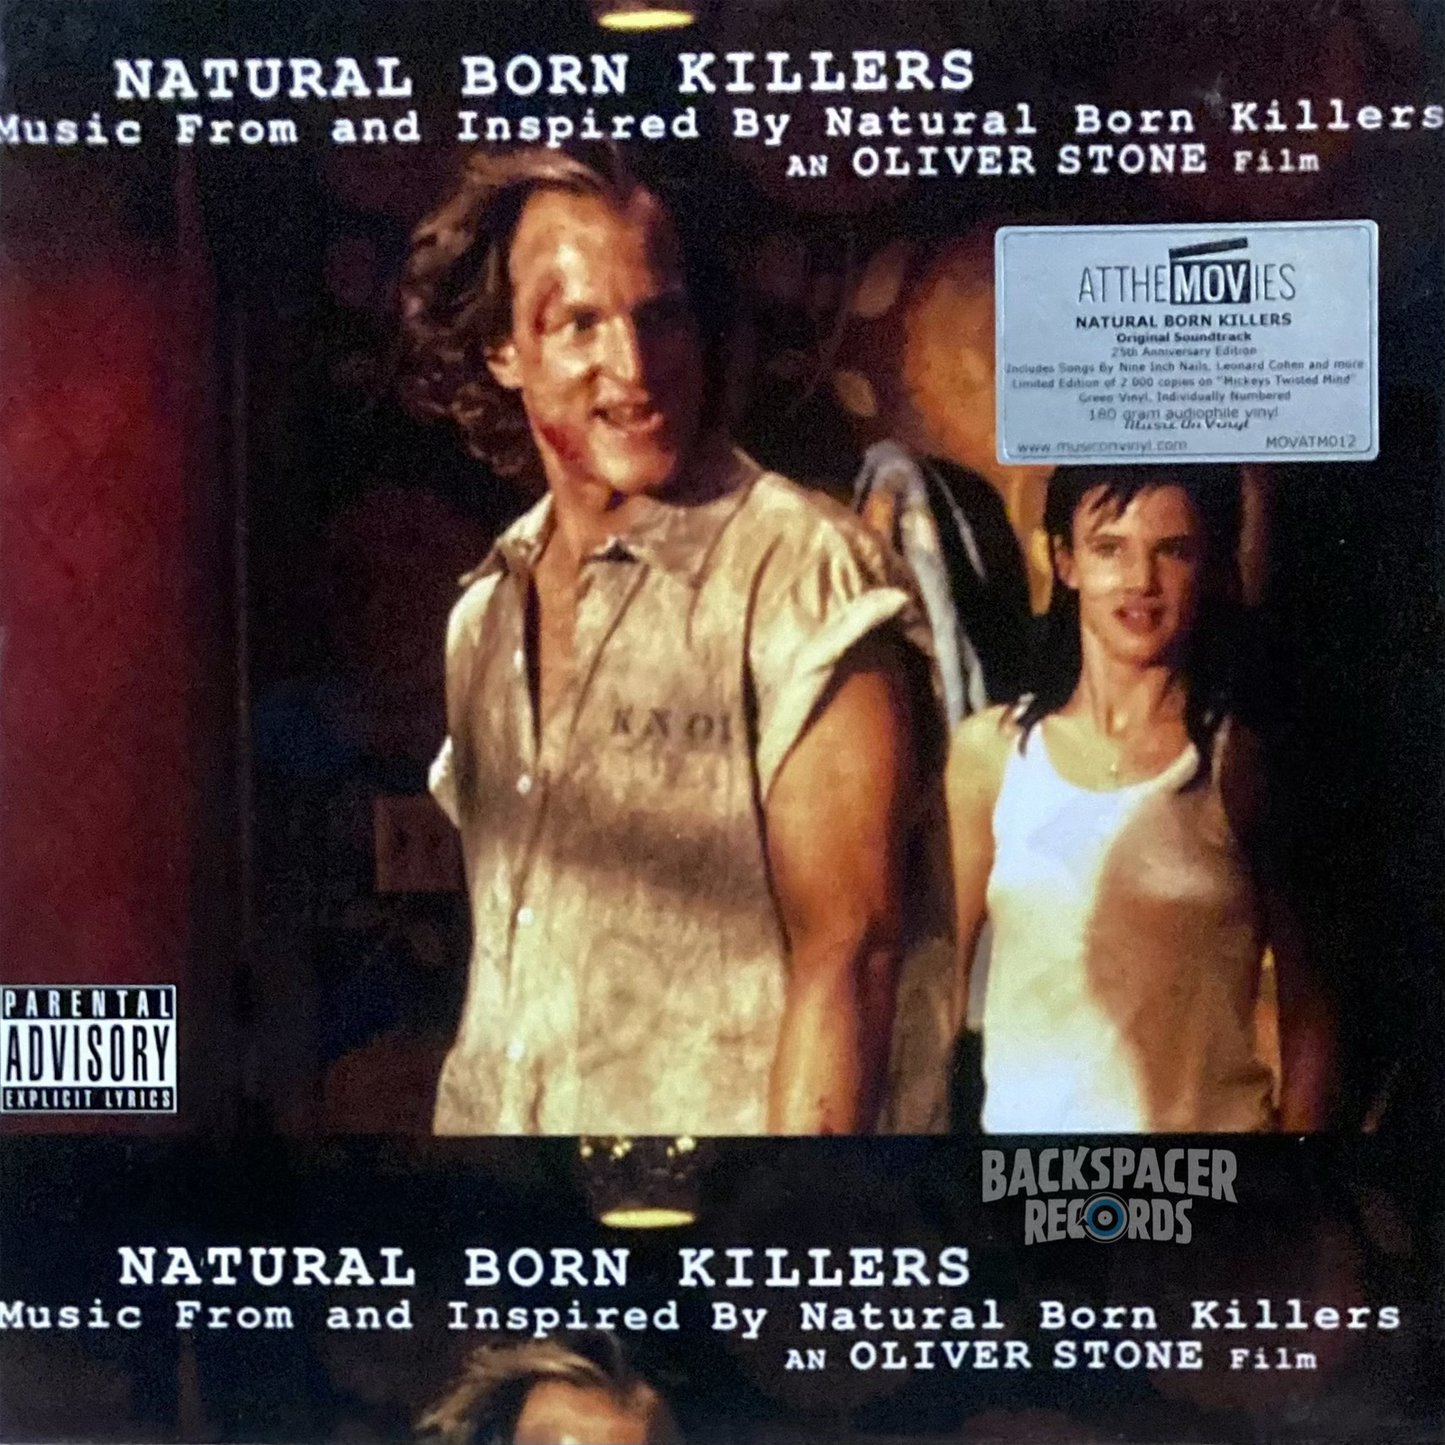 Natural Born Killers: Music From And Inspired By Natural Born Killers An Oliver Stone Film - Various Artists 2-LP (MOV)